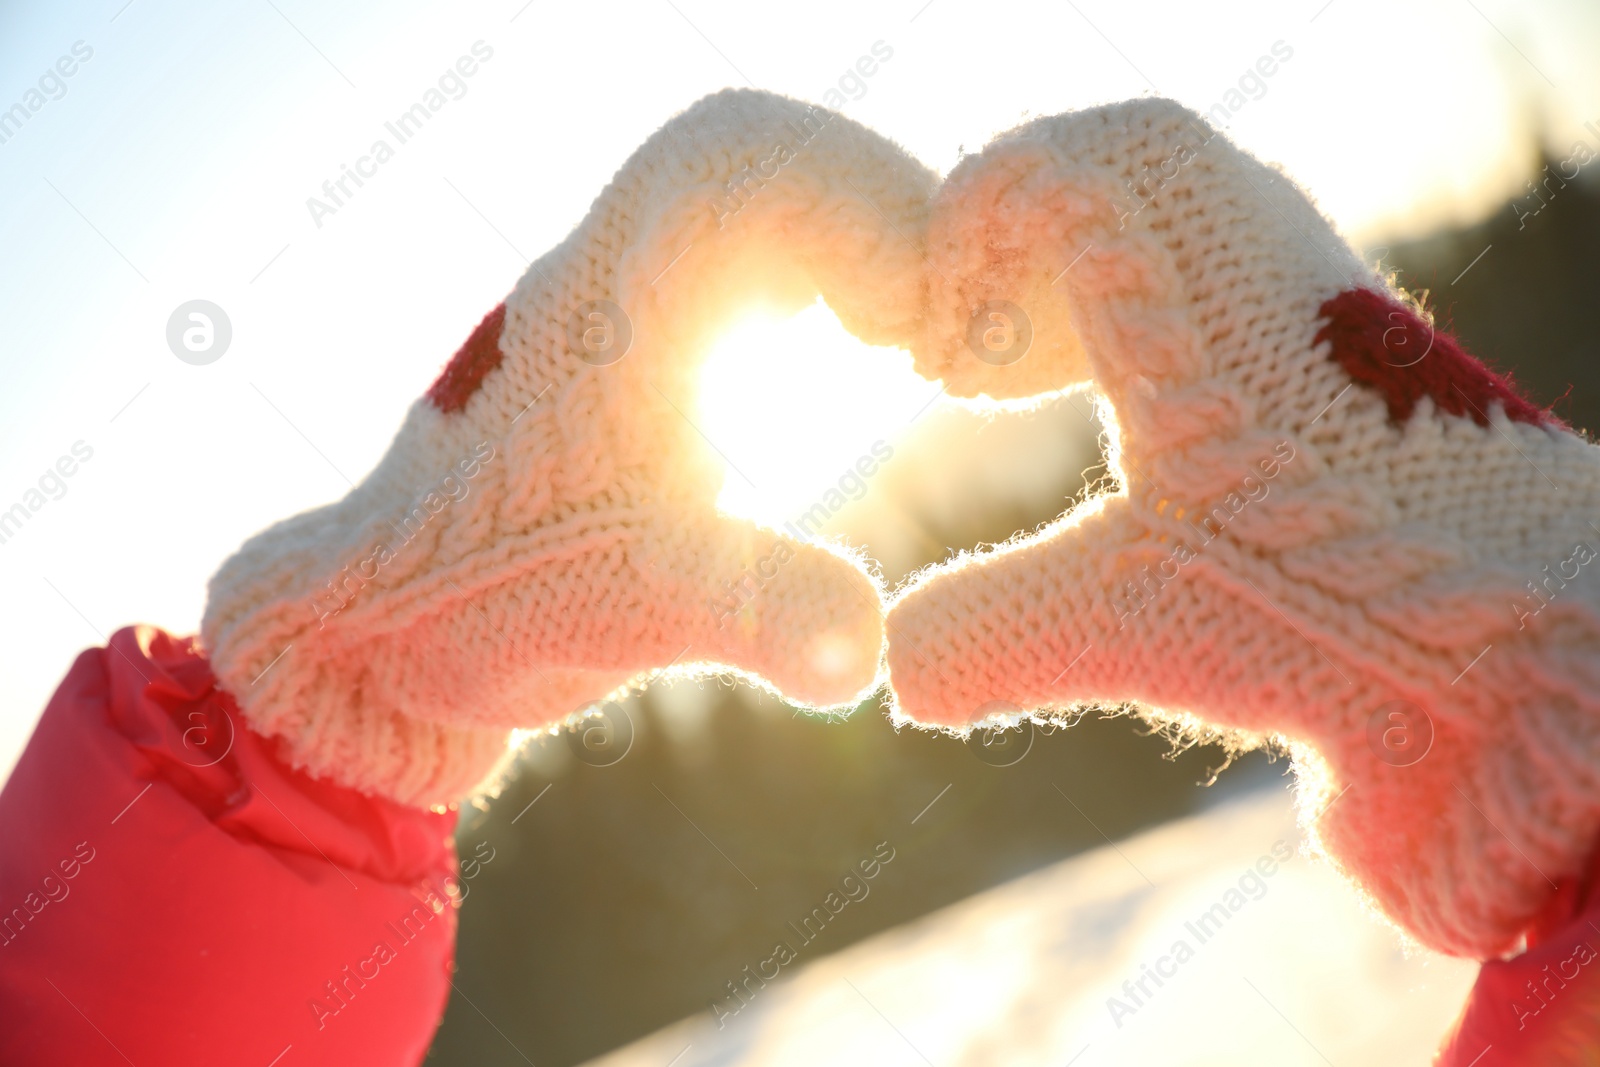 Photo of Woman making heart with hands outdoors at sunset, closeup. Winter vacation